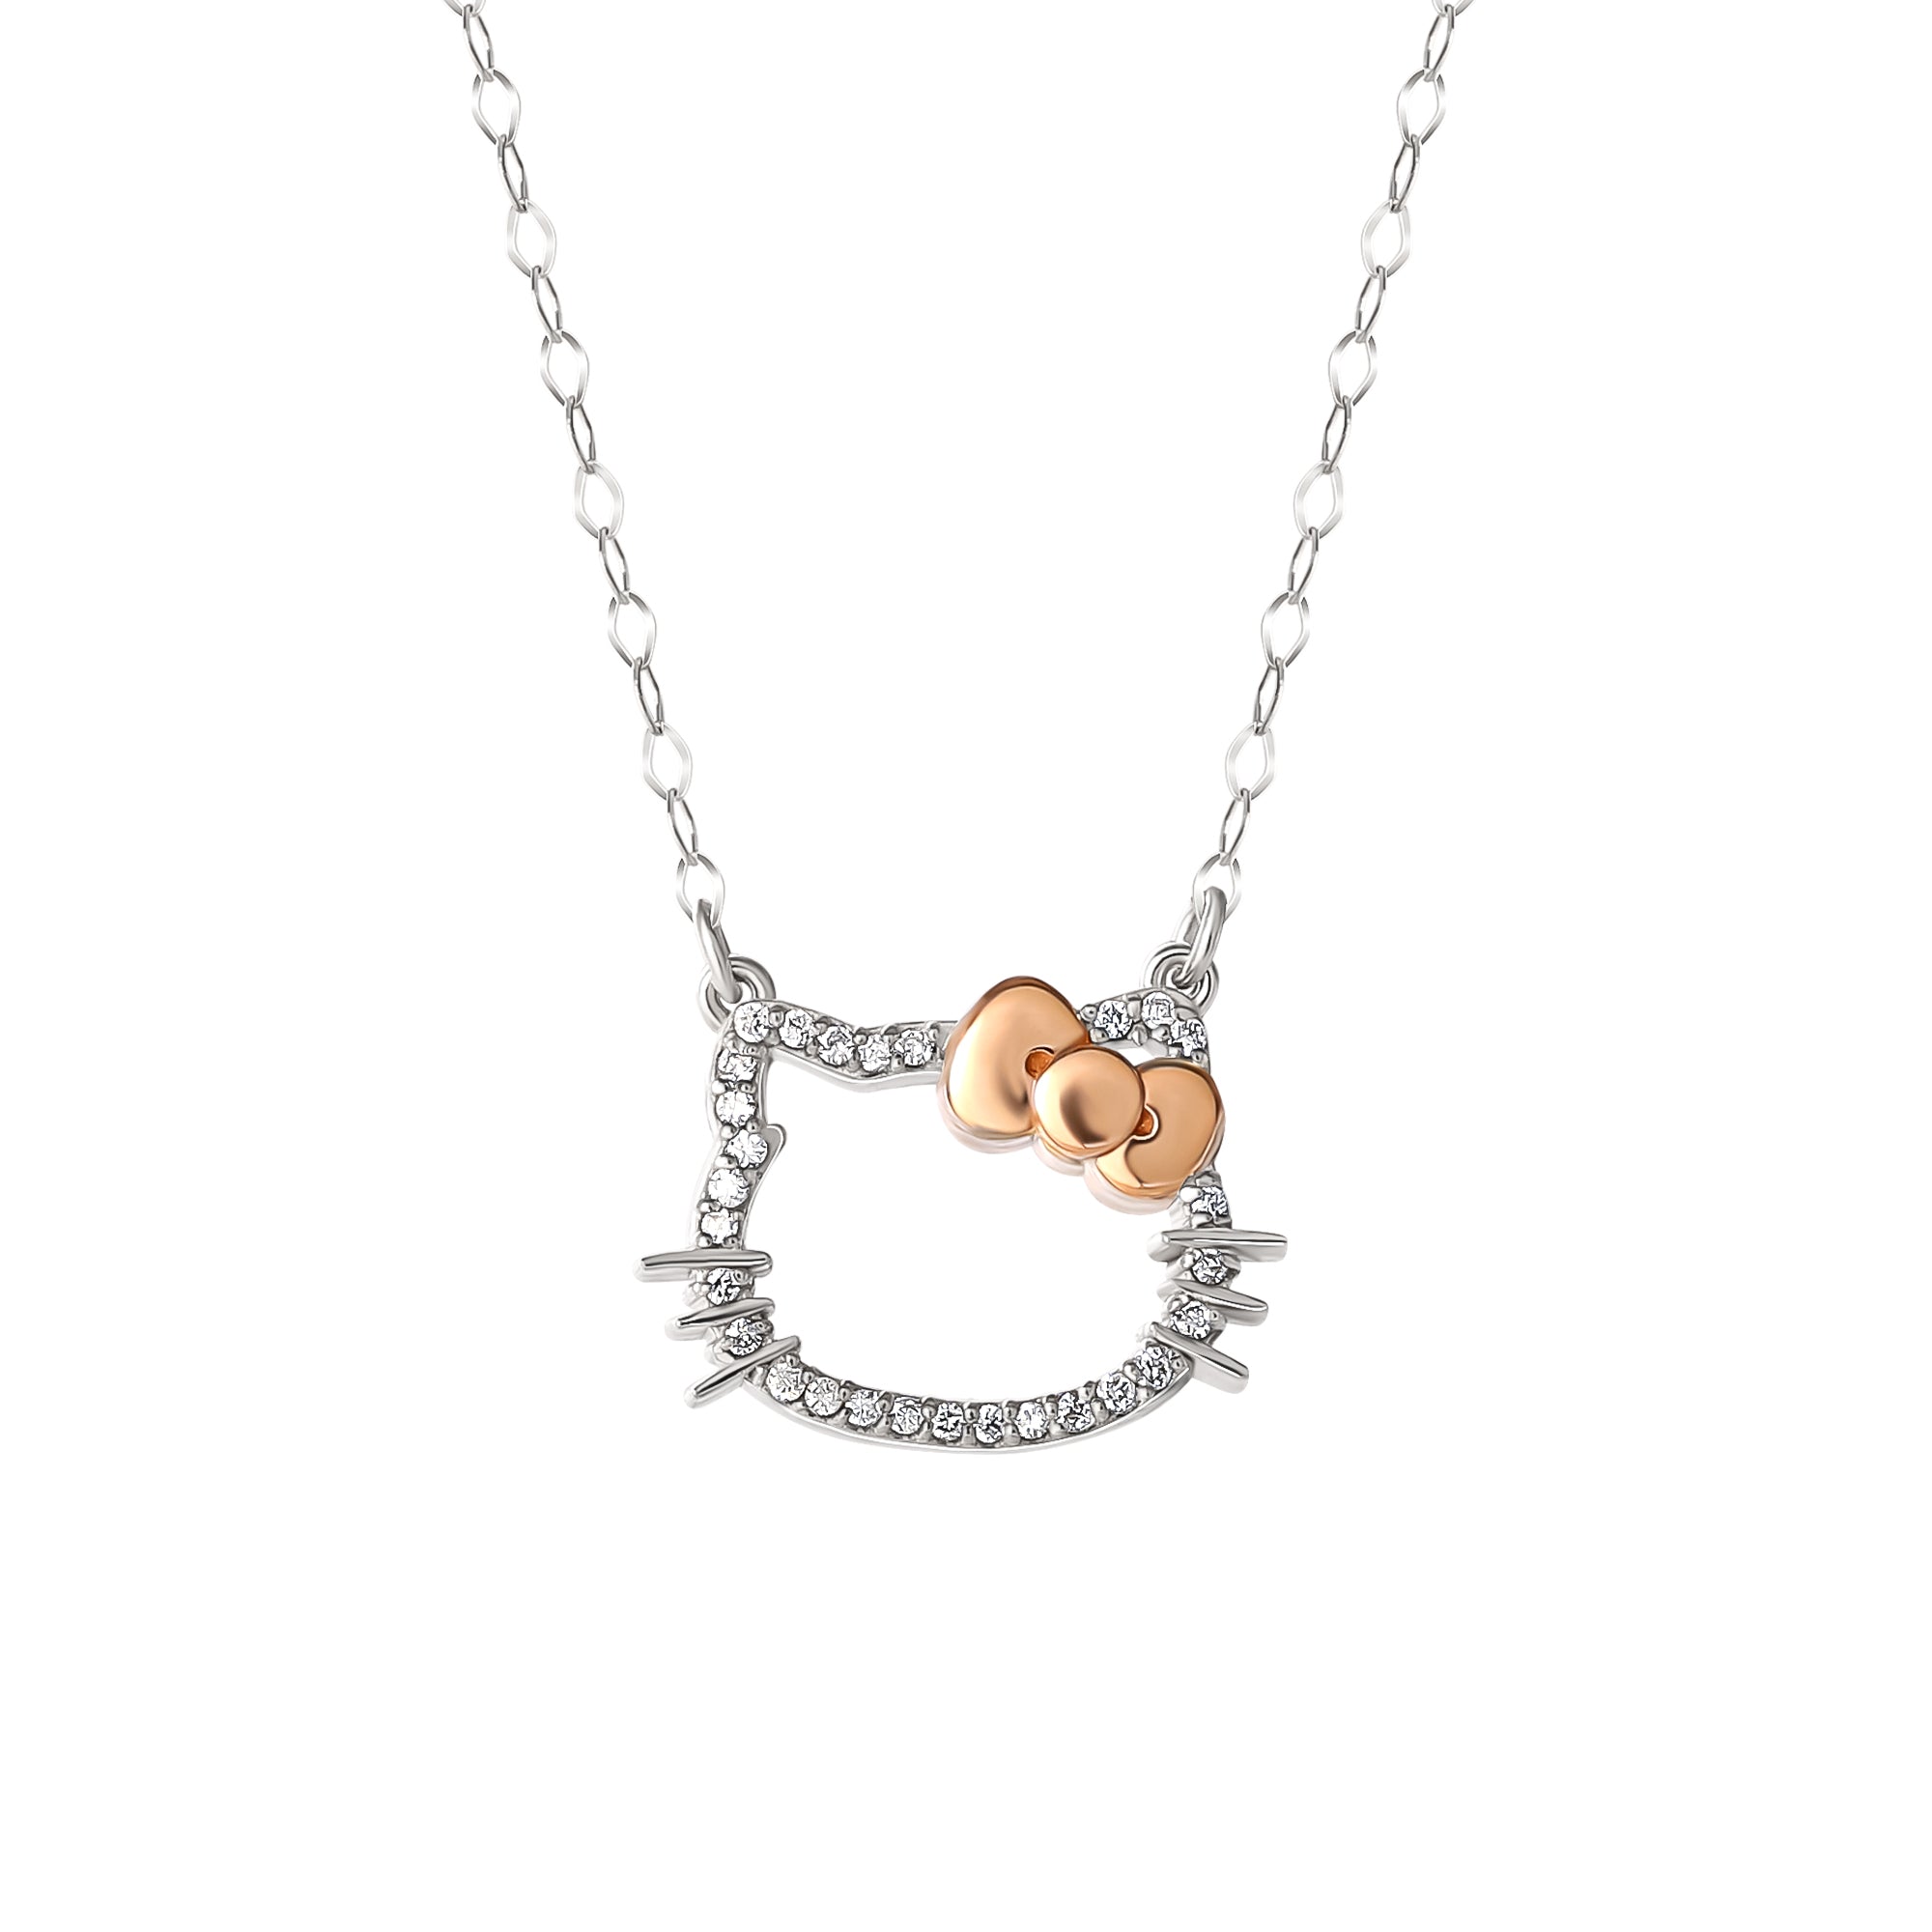 Hello Kitty Silver Plated Crystal Necklace